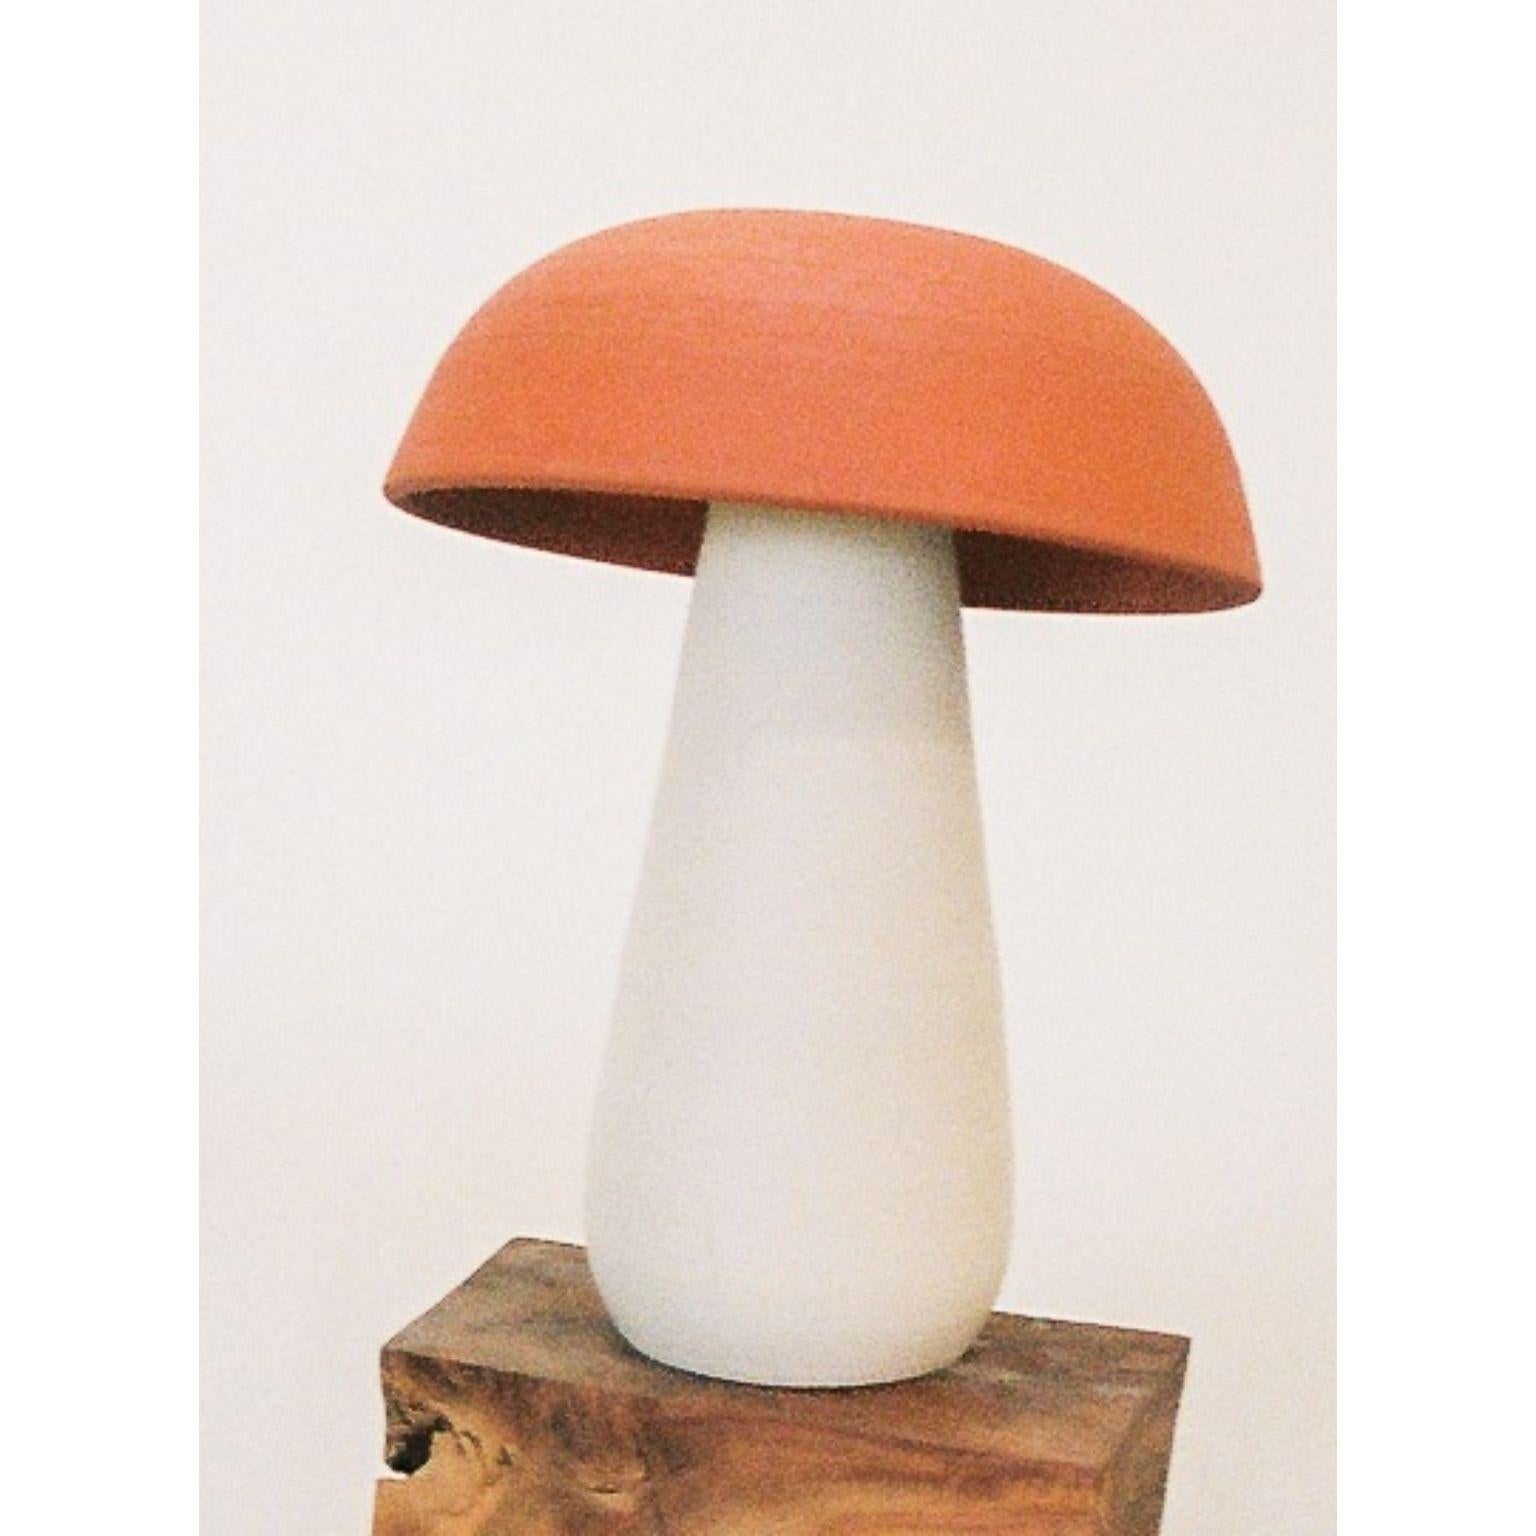 Glazed Set of 4 Mushroom Lamps by Nick Pourfard For Sale